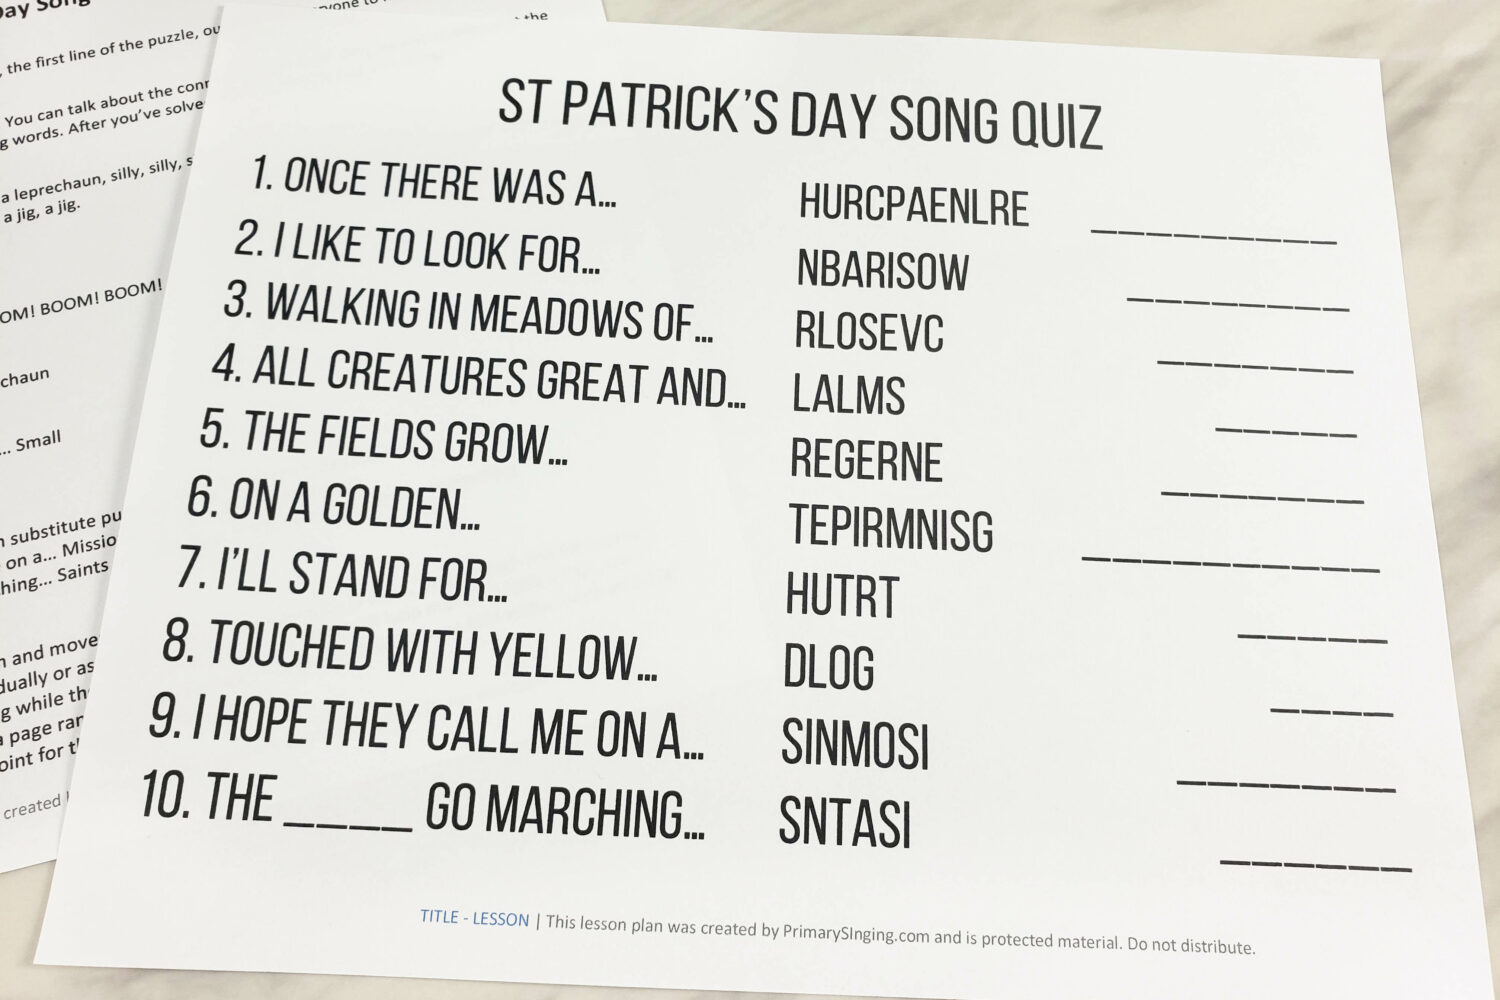 St Patrick's Day Song Quiz Singing Time Ideas for LDS Primary Music Leaders